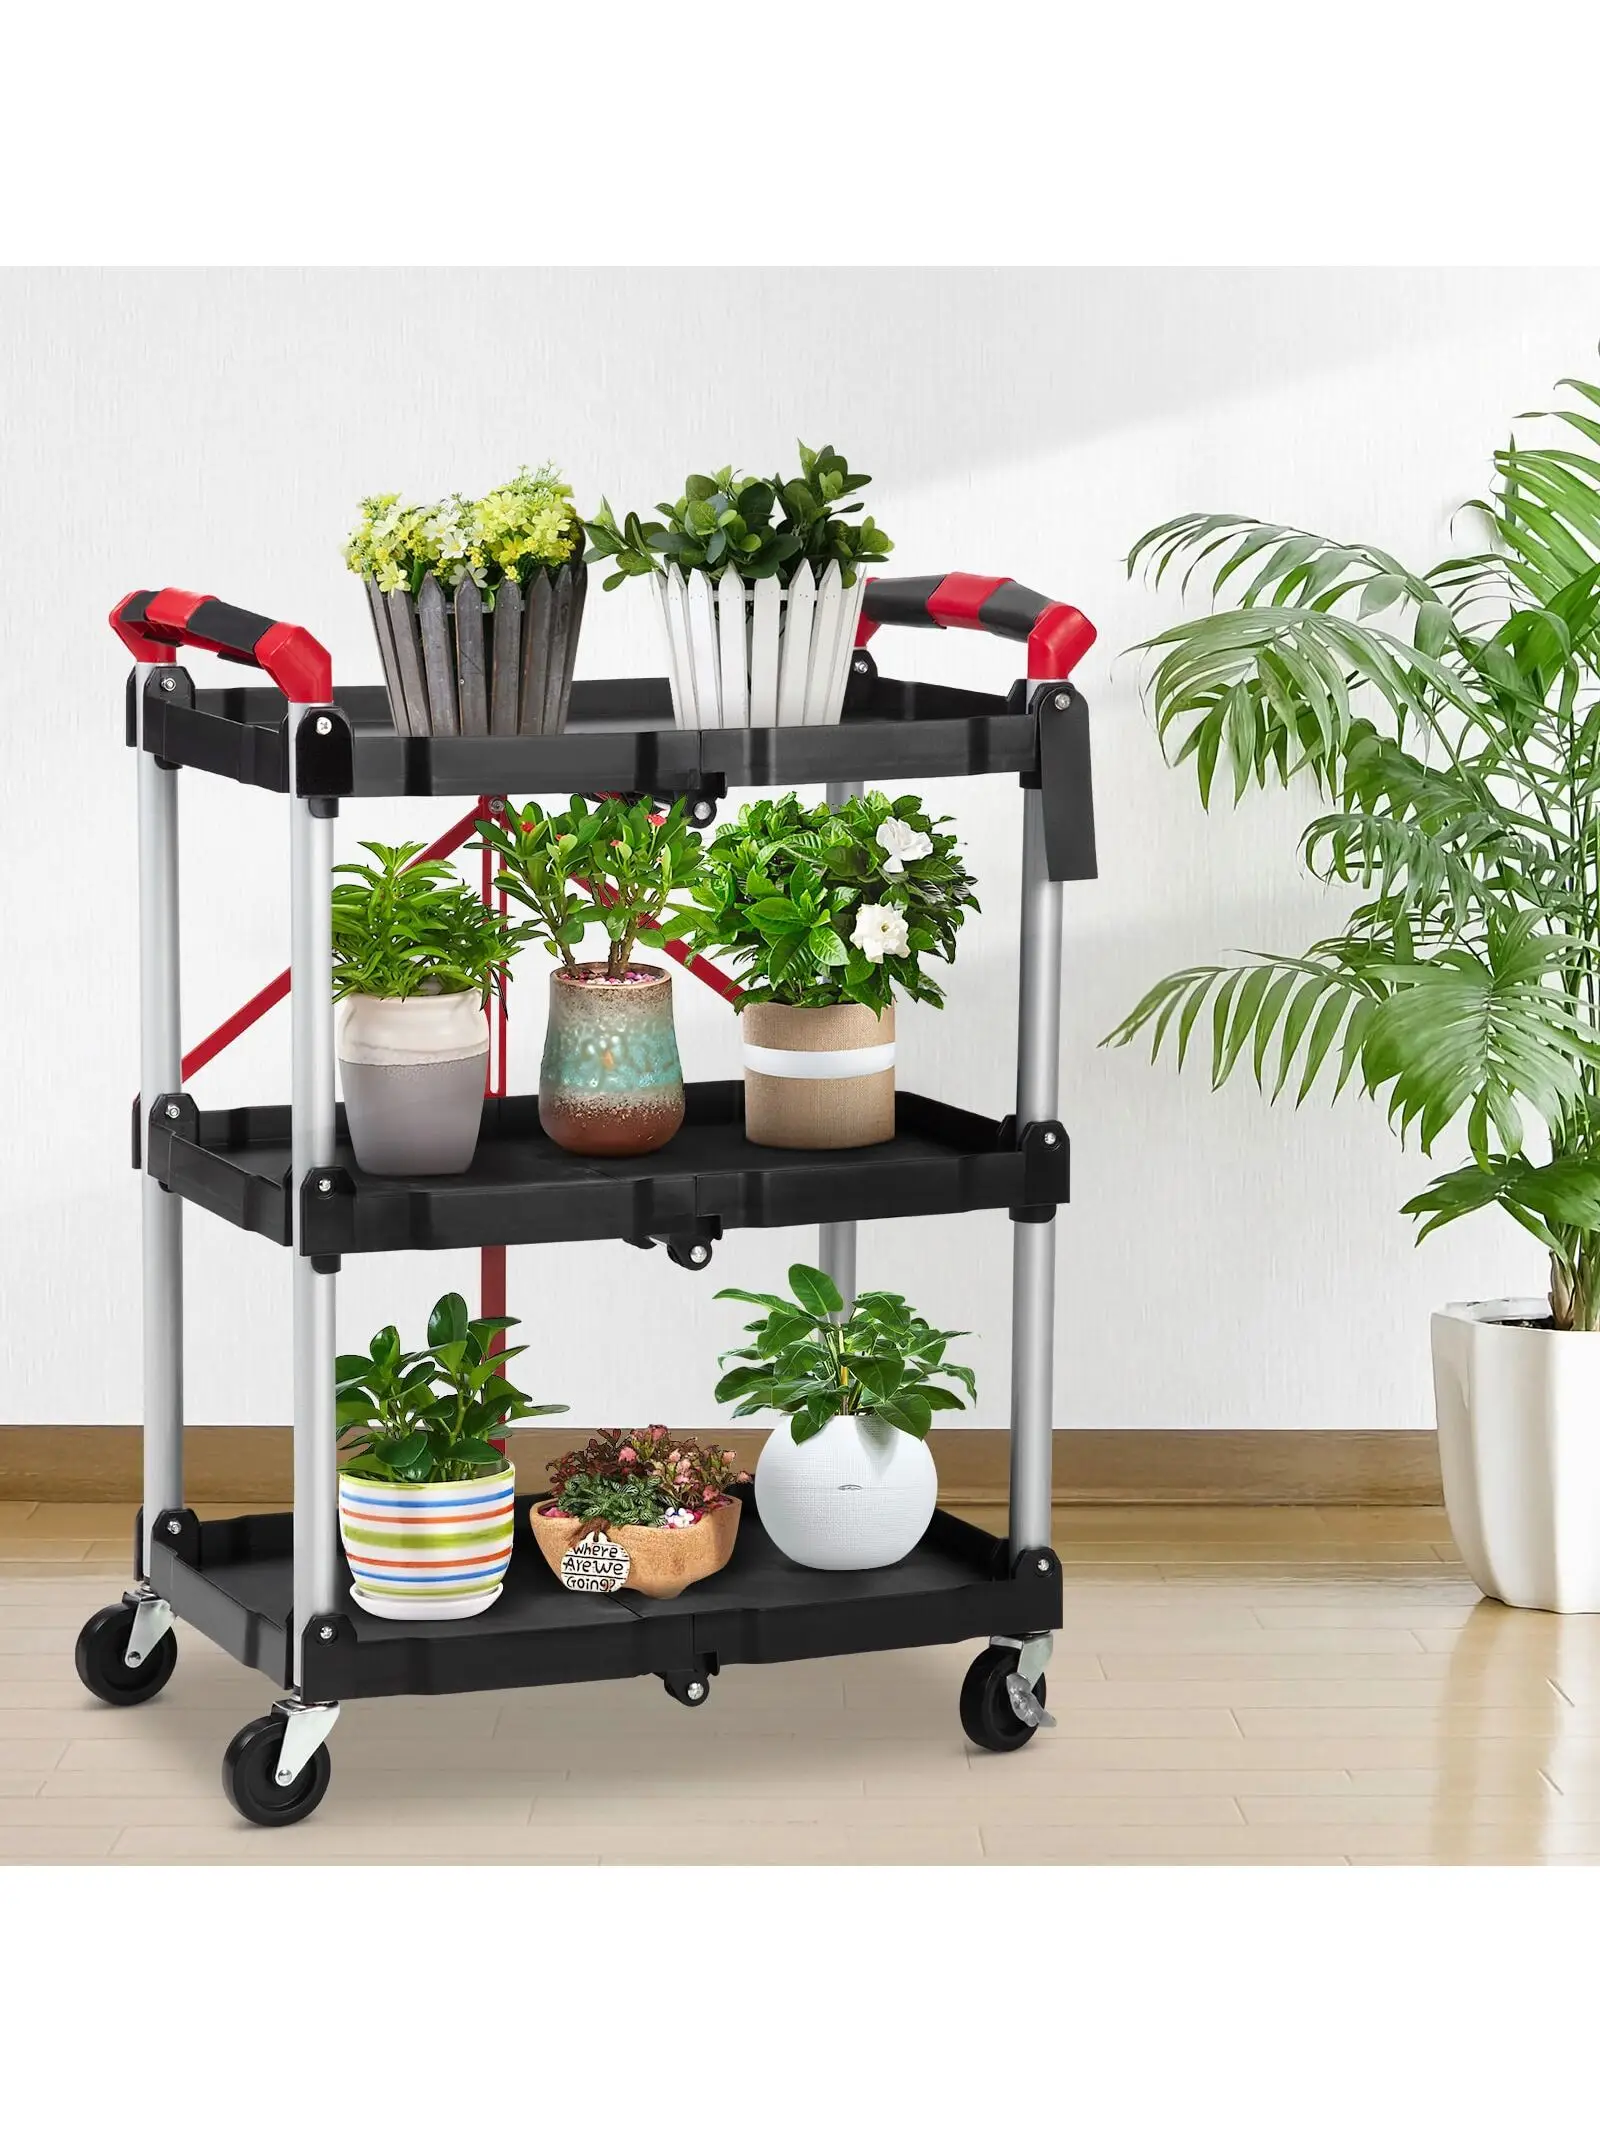 

Portable Folding Service Cart, 3 Tier Folding Utility Cart, Collapsible Rolling Cart for Home/Commercial/Office/Warehouse